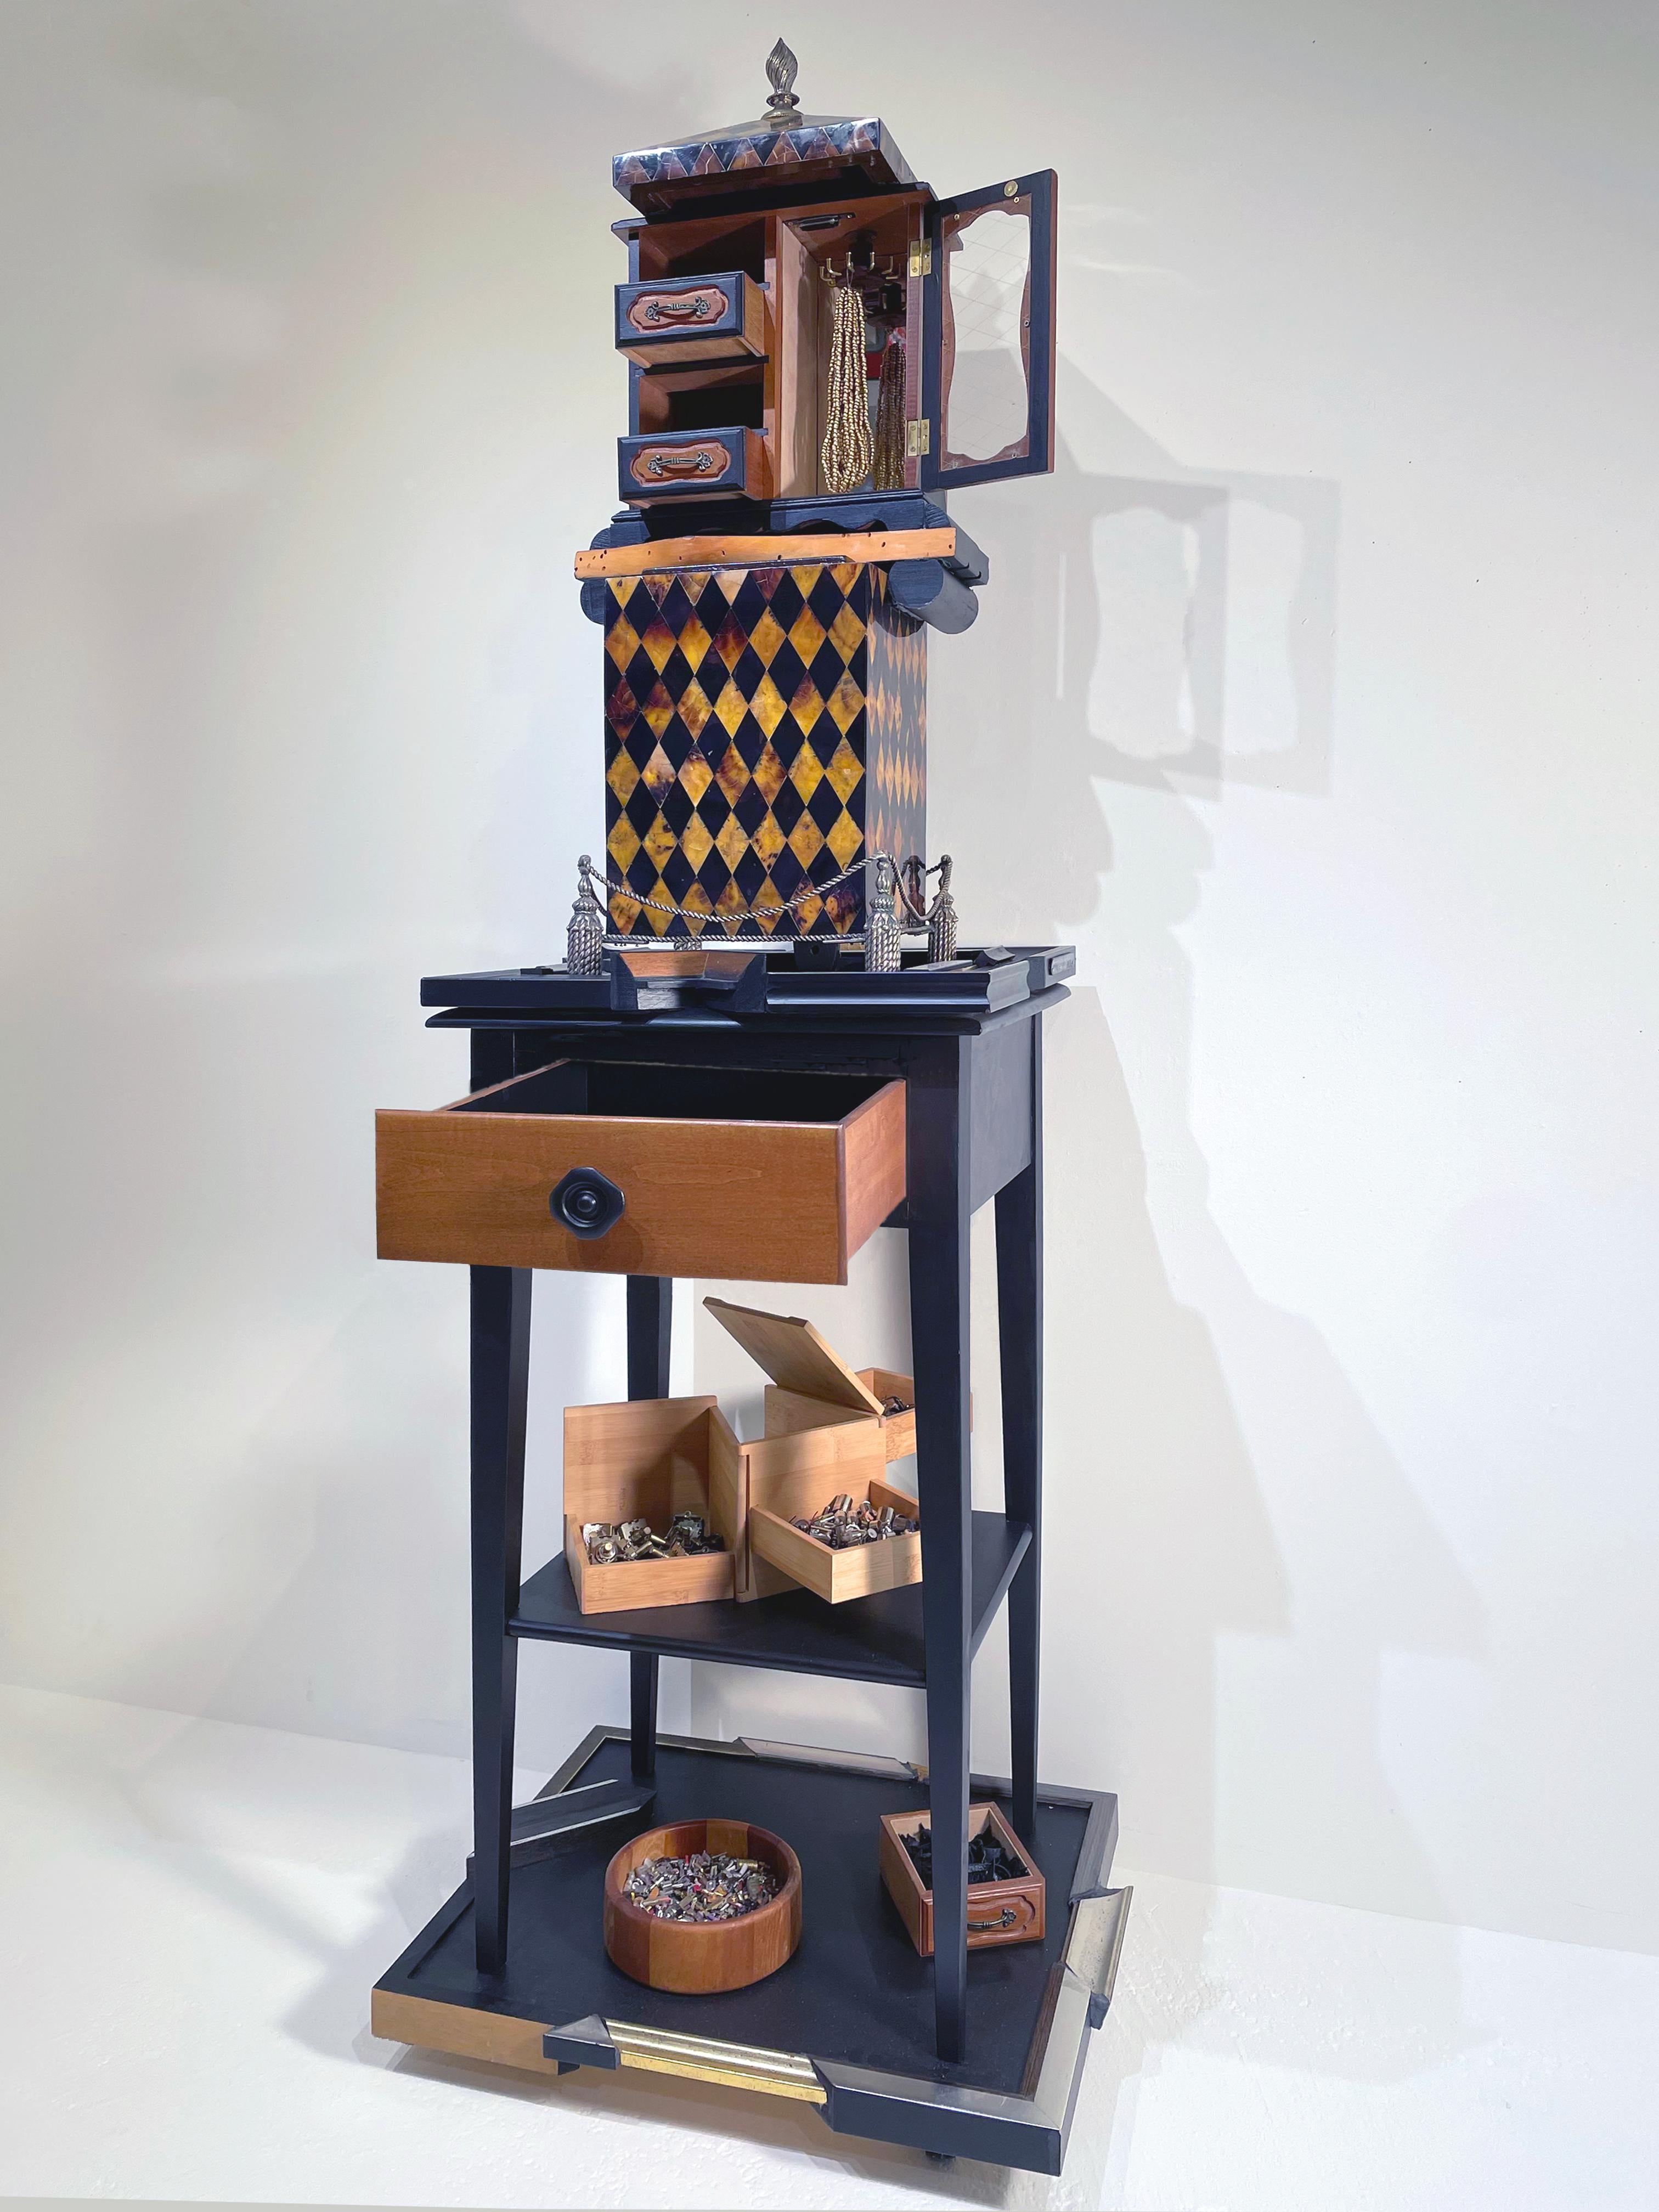 Linda Stein Abstract Sculpture - Components for Transitioning from Home 1143  - Cabinet of Curiosities Sculpture